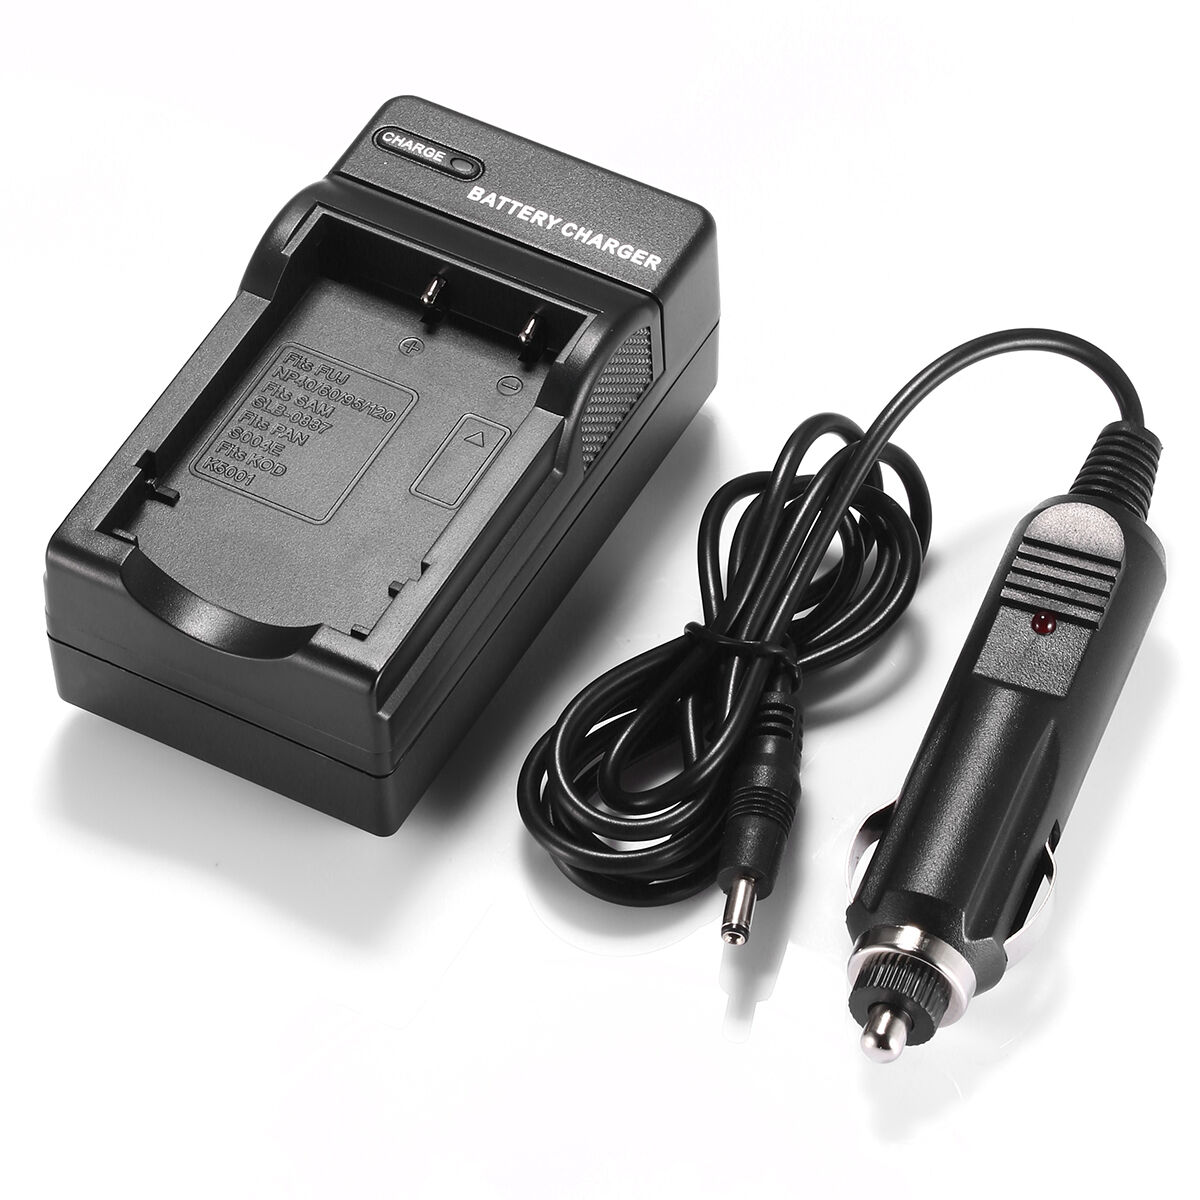 CASIO Exilim EX-H15 battery charger